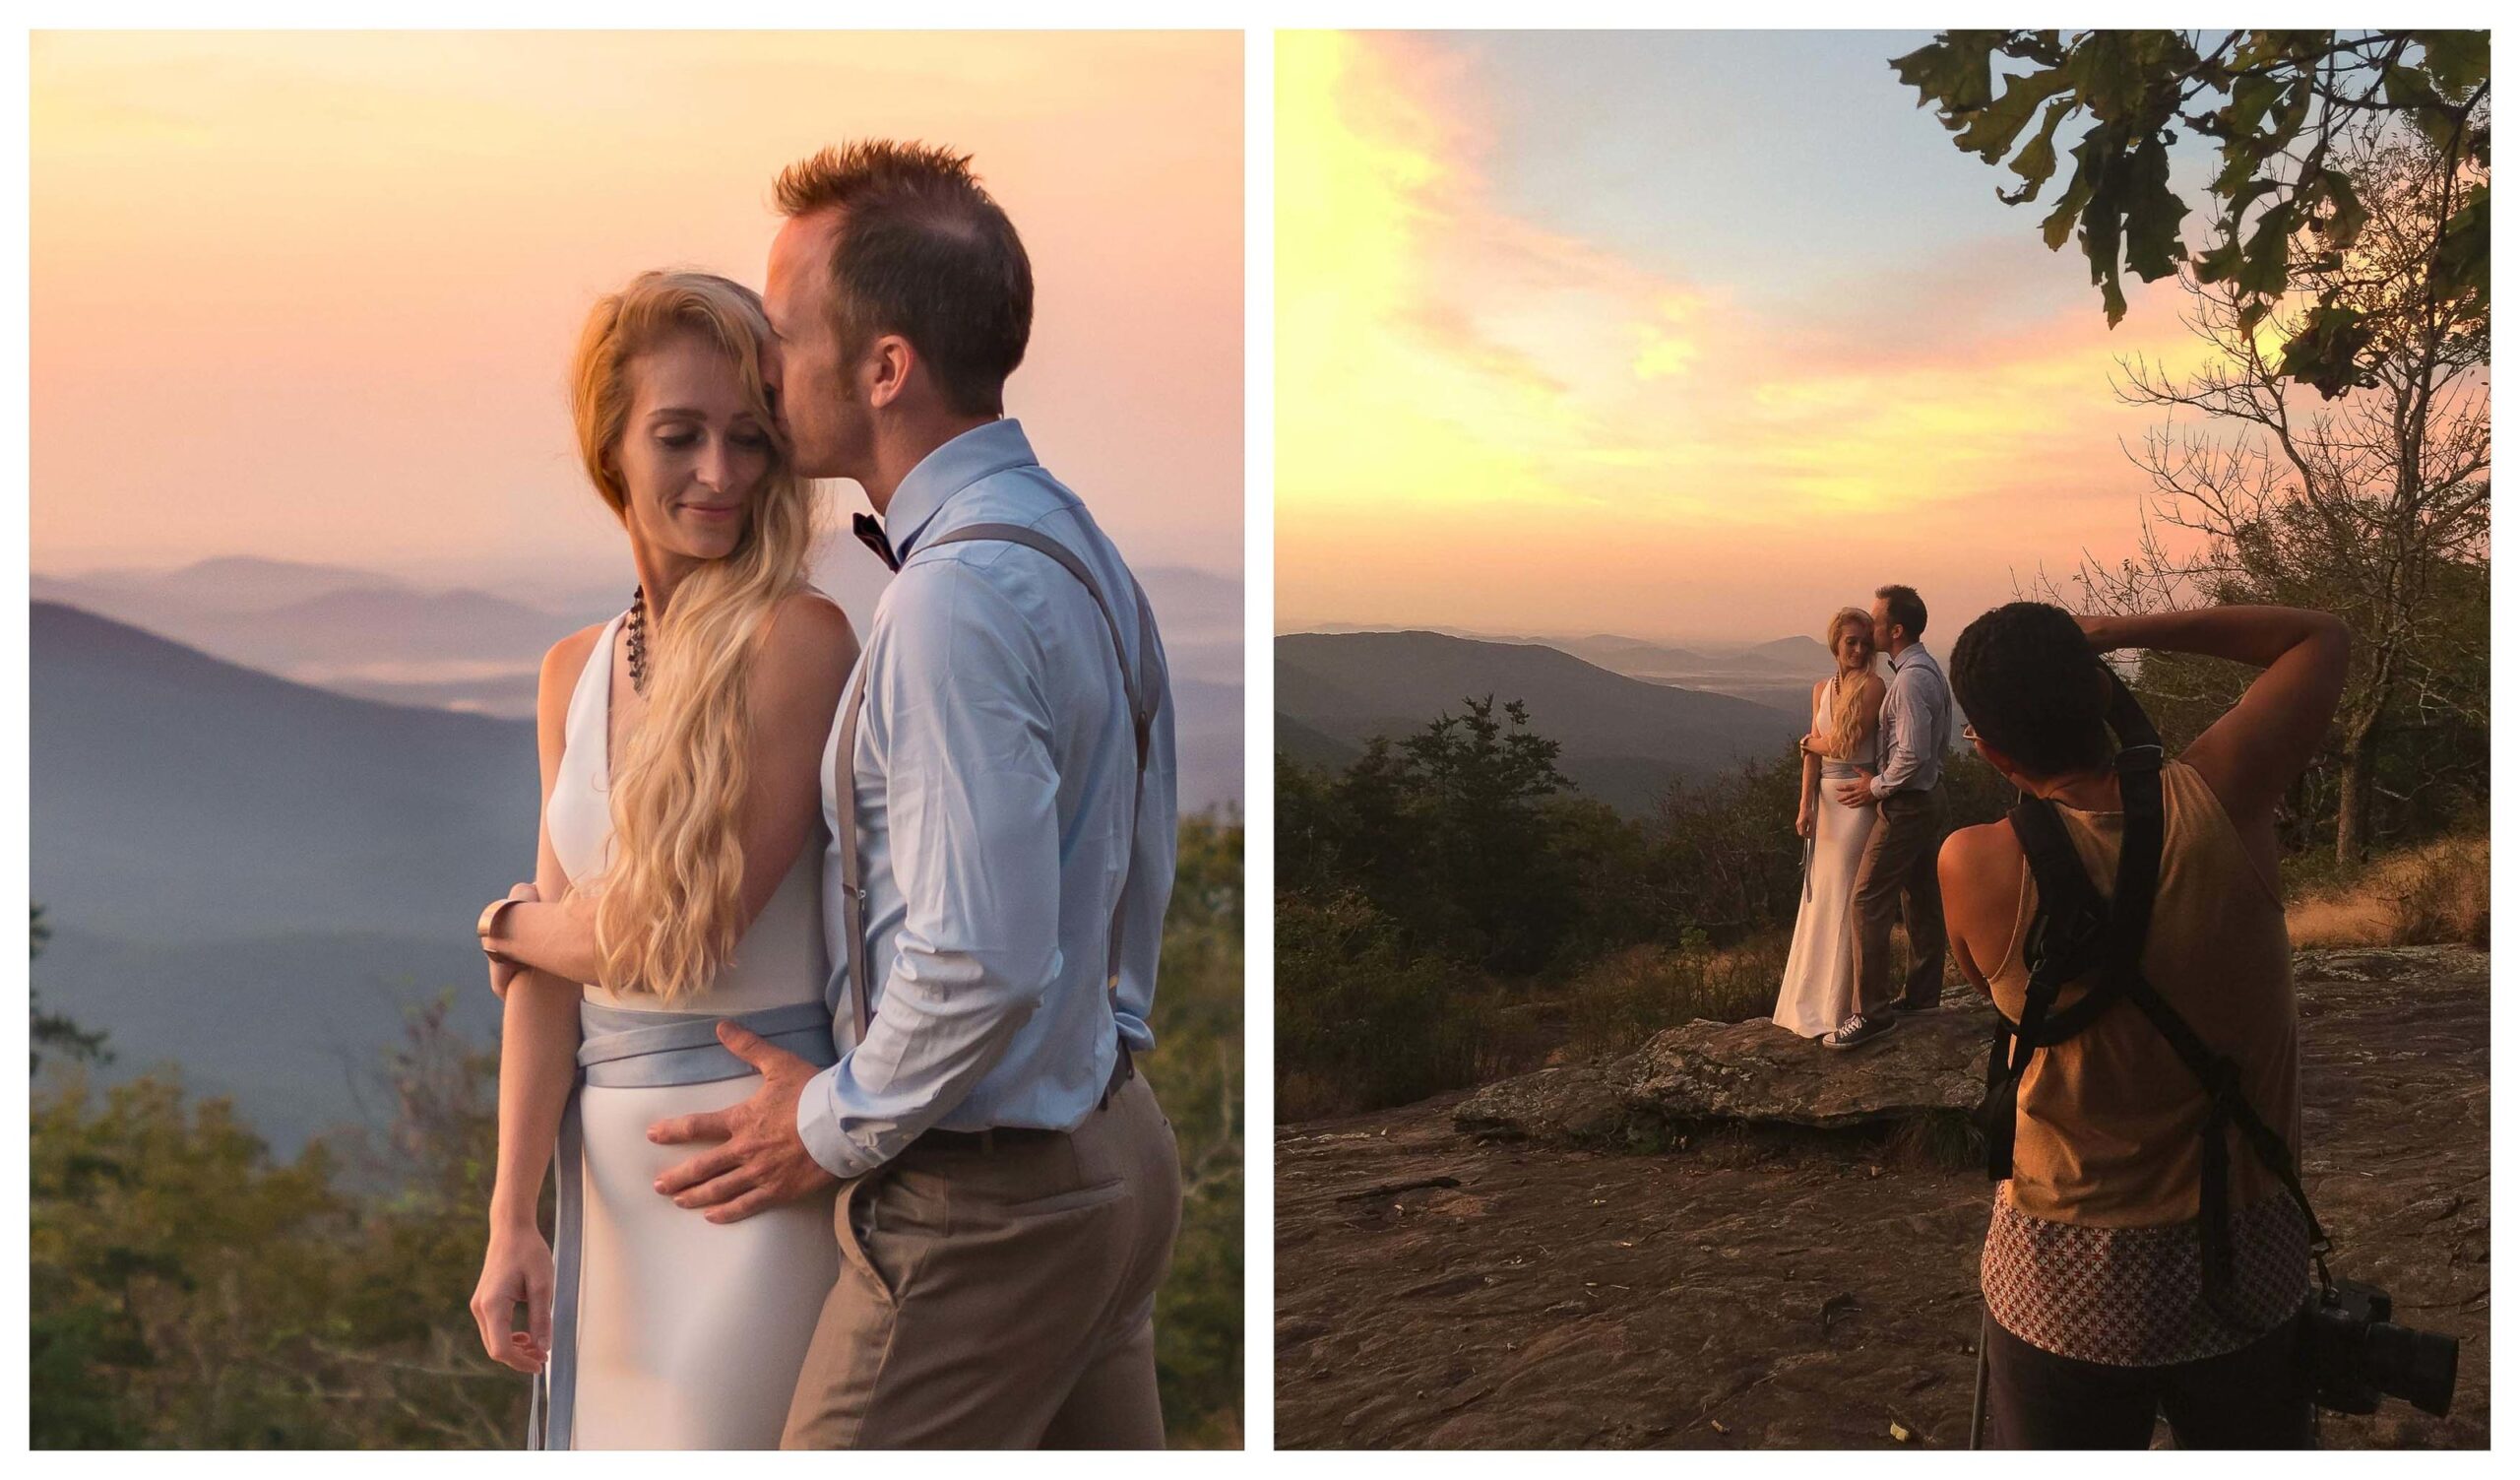 a Behind the Scenes view of an elopement photographer photographing a couple in beautiful orange and pink sunrise in Tennessee as they adventure using their adventure elopement photography package